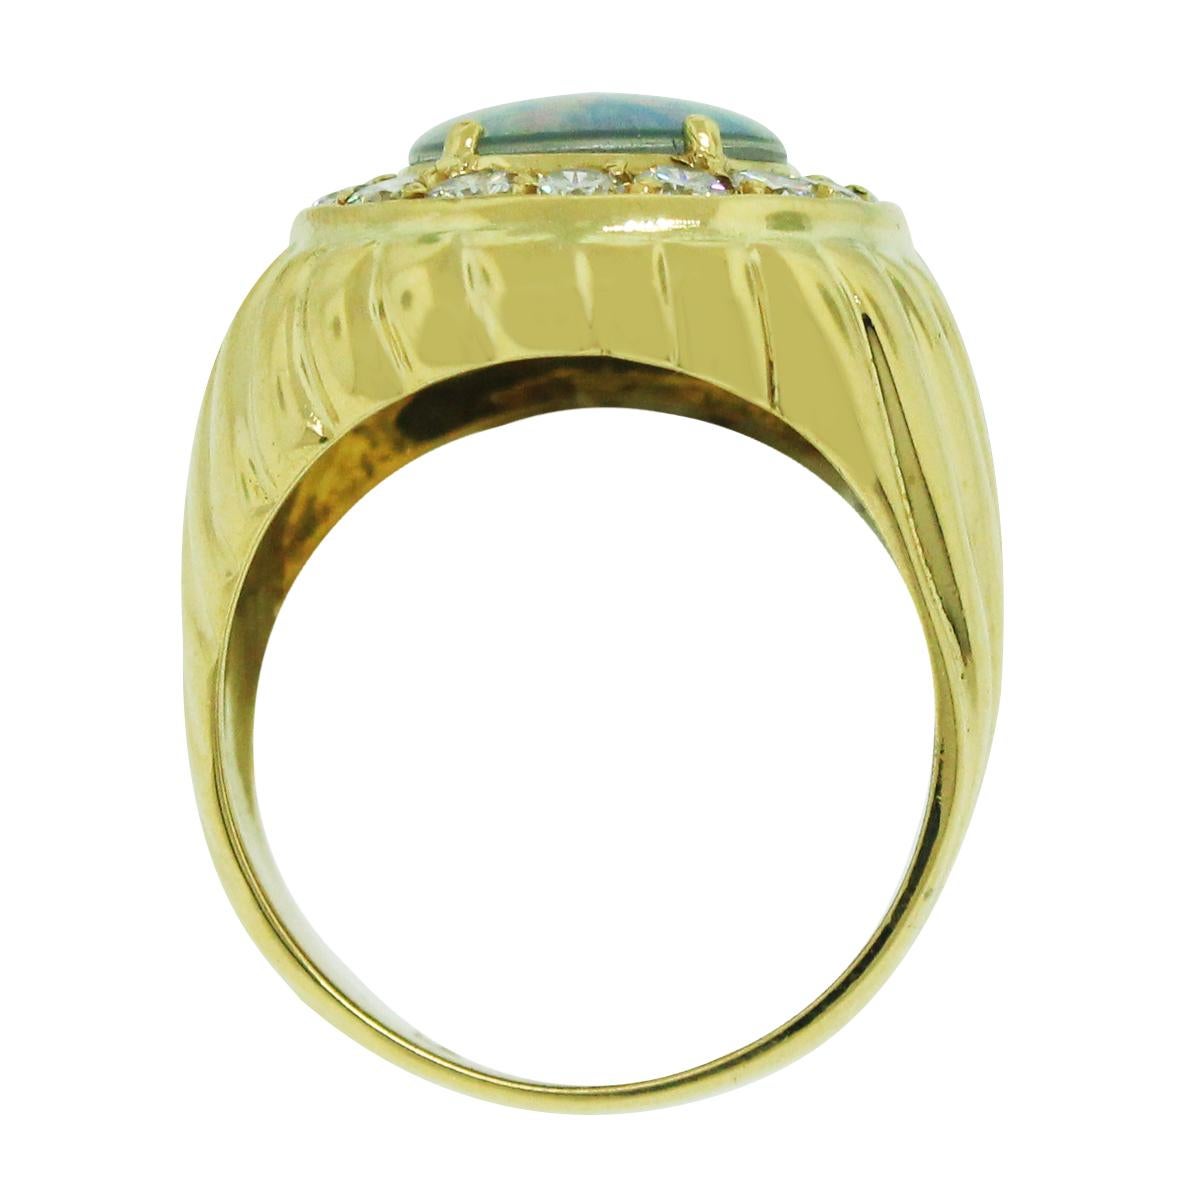 Material: 18k Yellow Gold
Gemstone Details: Oval opal gemstone measuring 14.5mm x 10.6mm
Accent Diamond Details: Approximately 1.12ctw round brilliant accent diamonds. Diamonds are H/I in color and SI1 in clarity.
Ring Size: 8.25 (can be